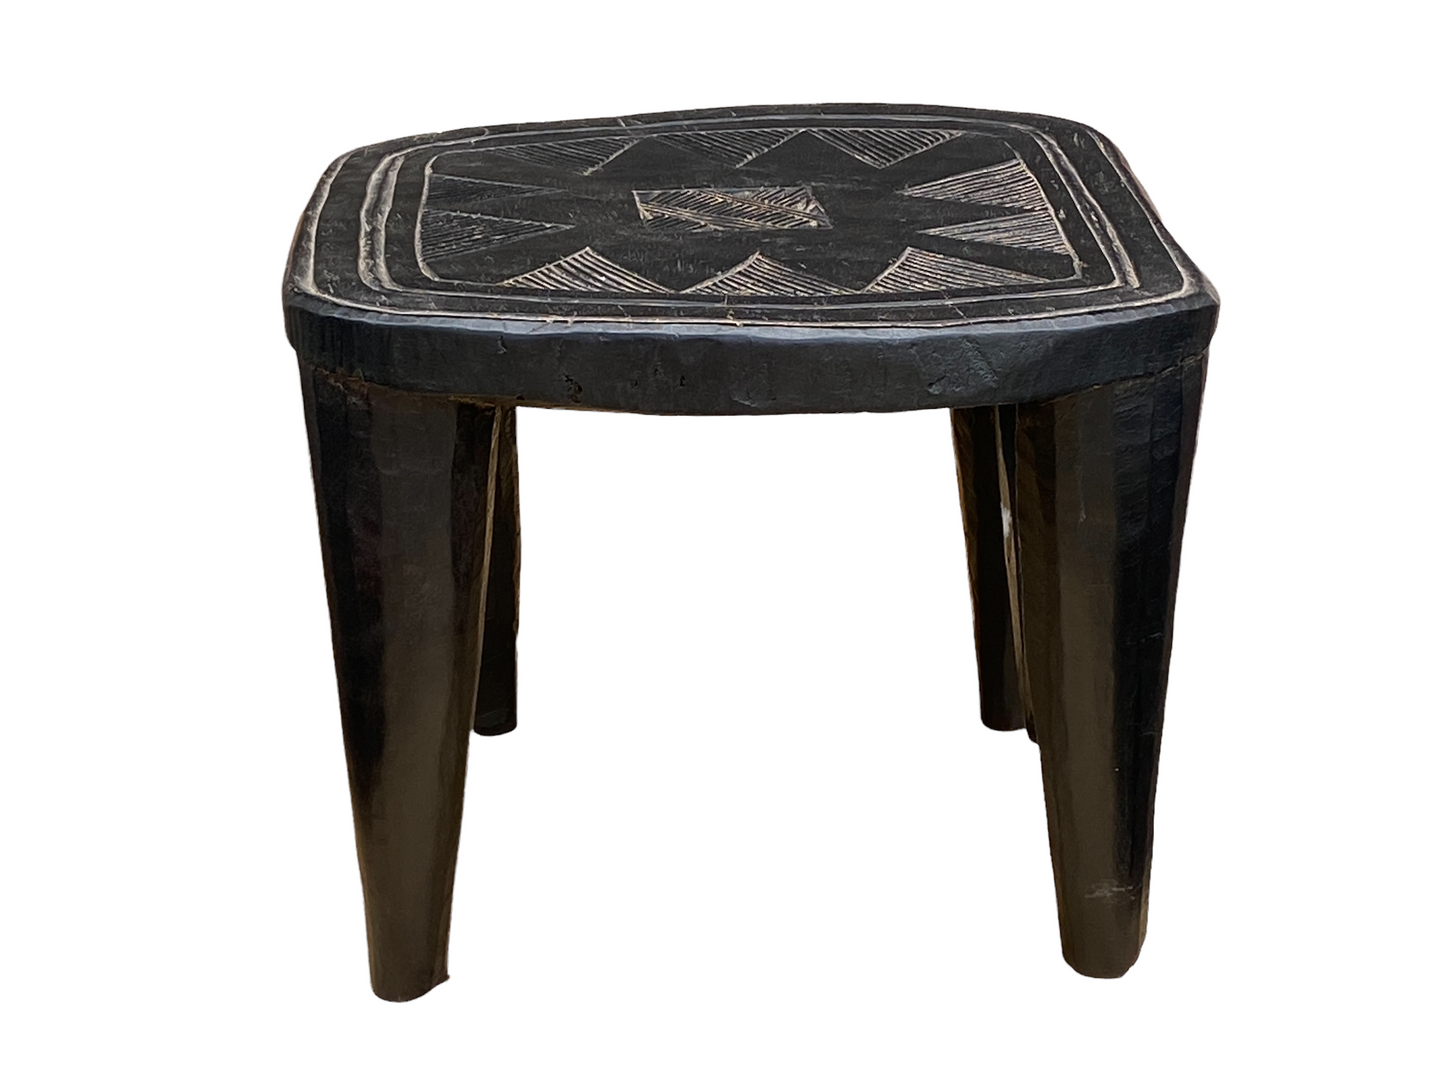 #4510 Superb African   Nupe Stool / Table Nigeria  19" W by 14" H